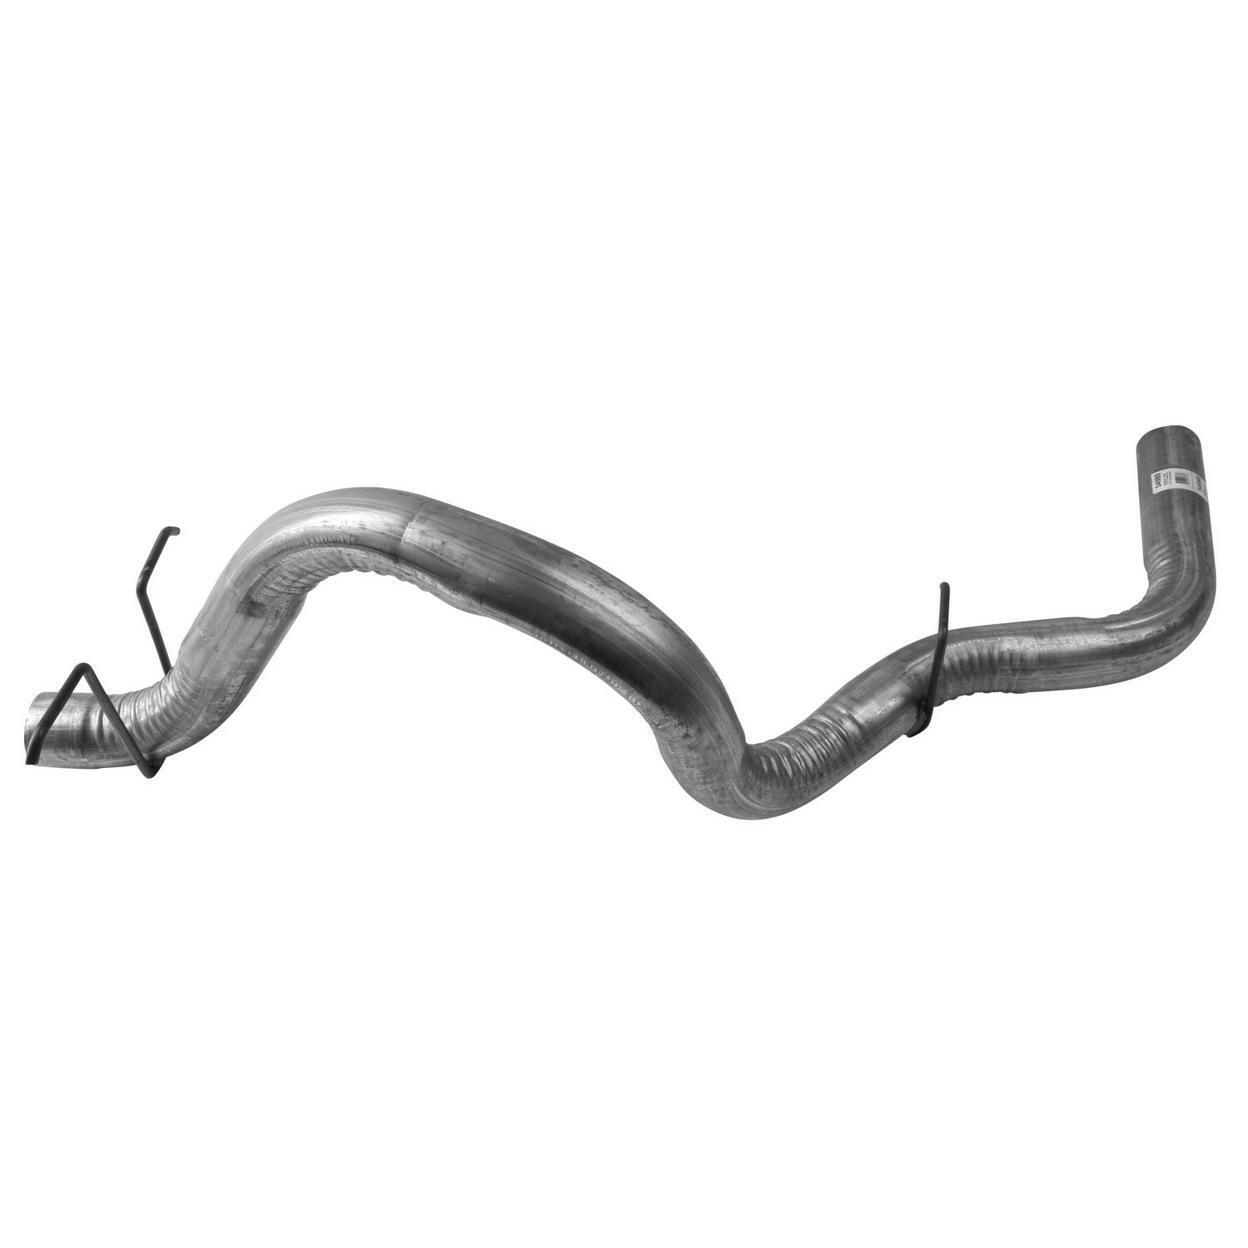 54980-AA Exhaust Tail Pipe Fits 2000-2003 Ford Excursion 6.8L V10 GAS SOHC